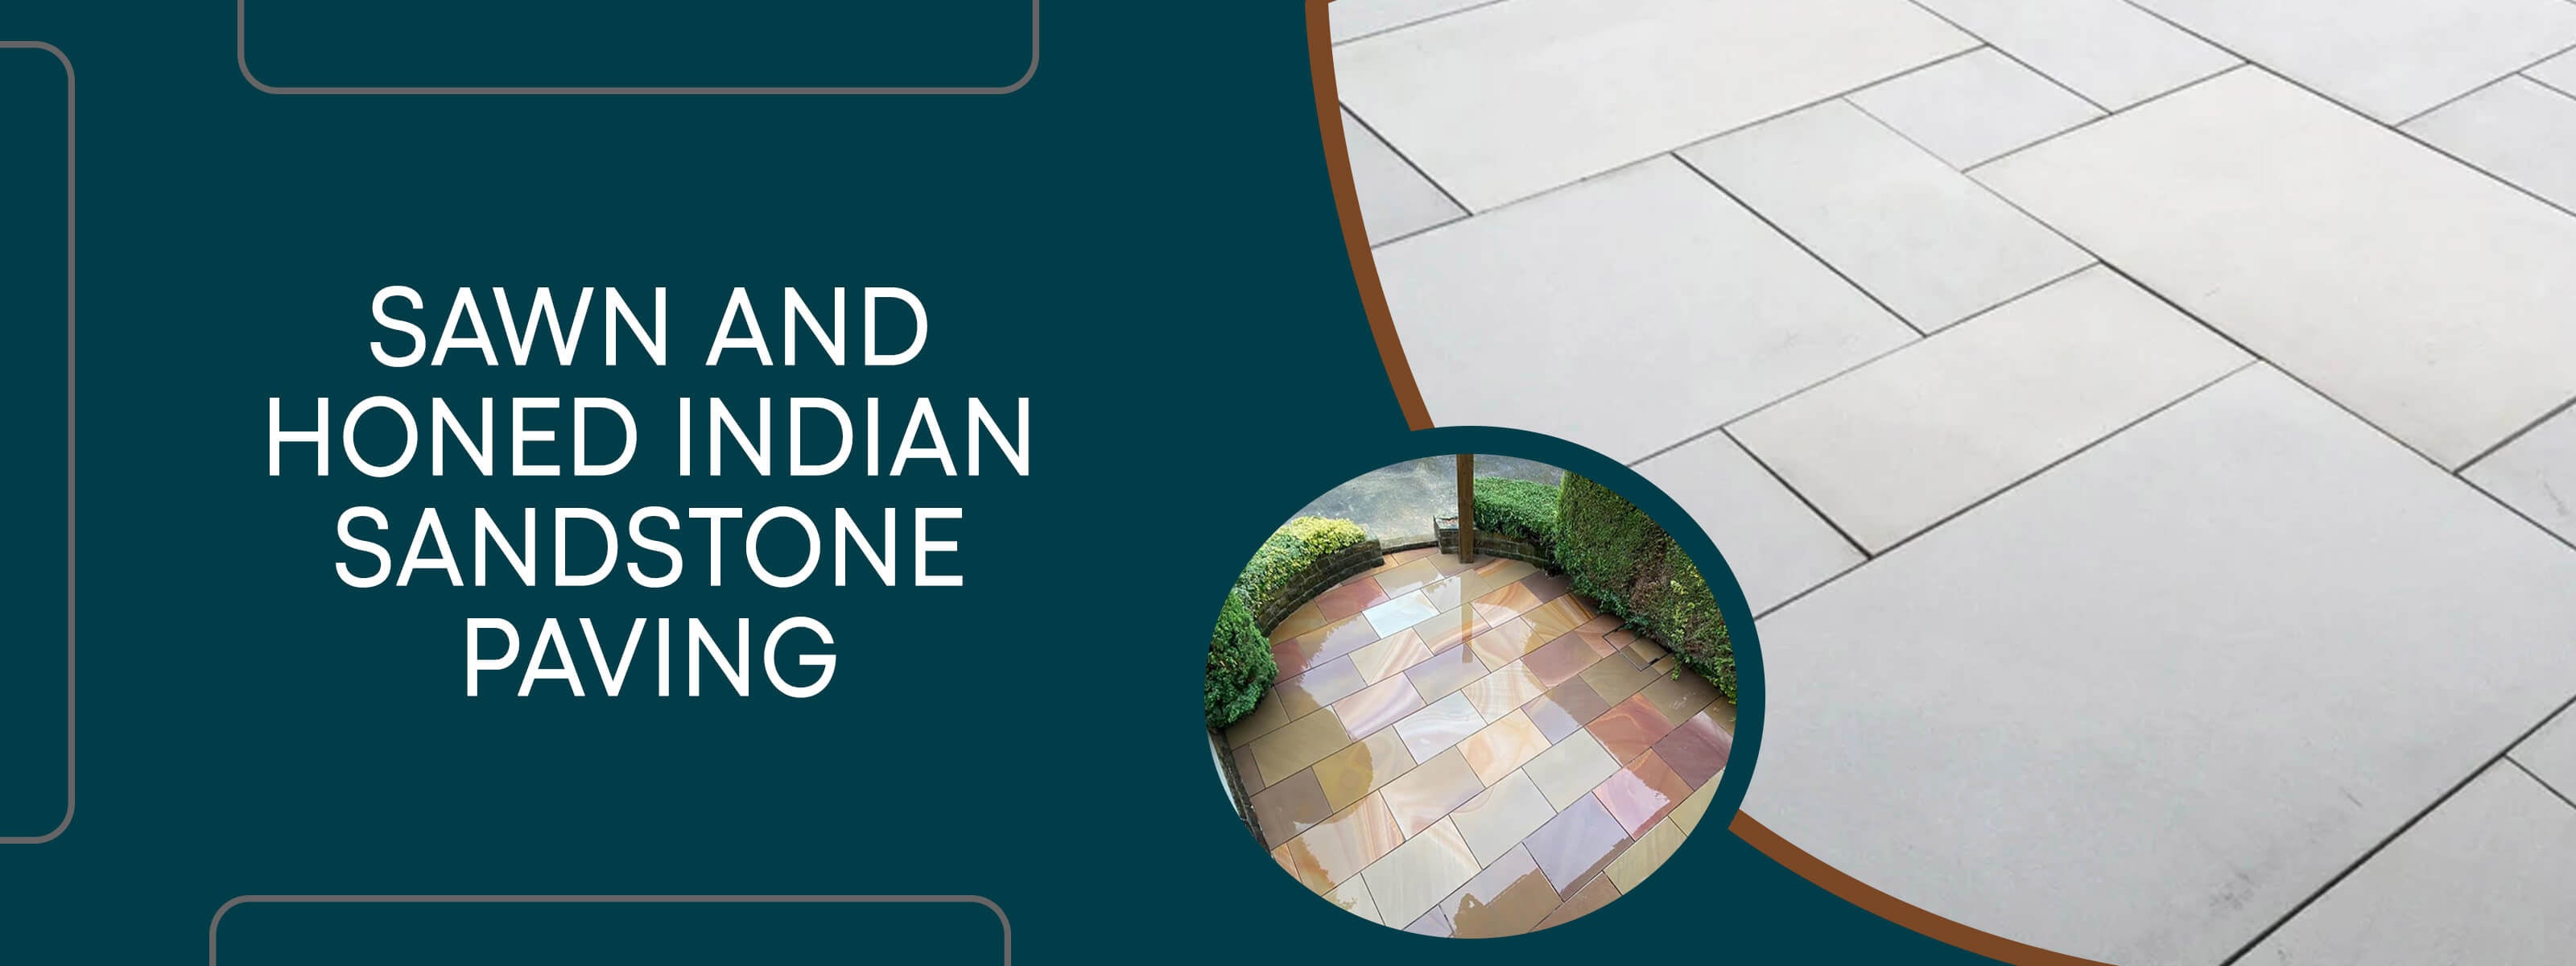 SAWN AND HONED INDIAN SANDSTONE PAVING